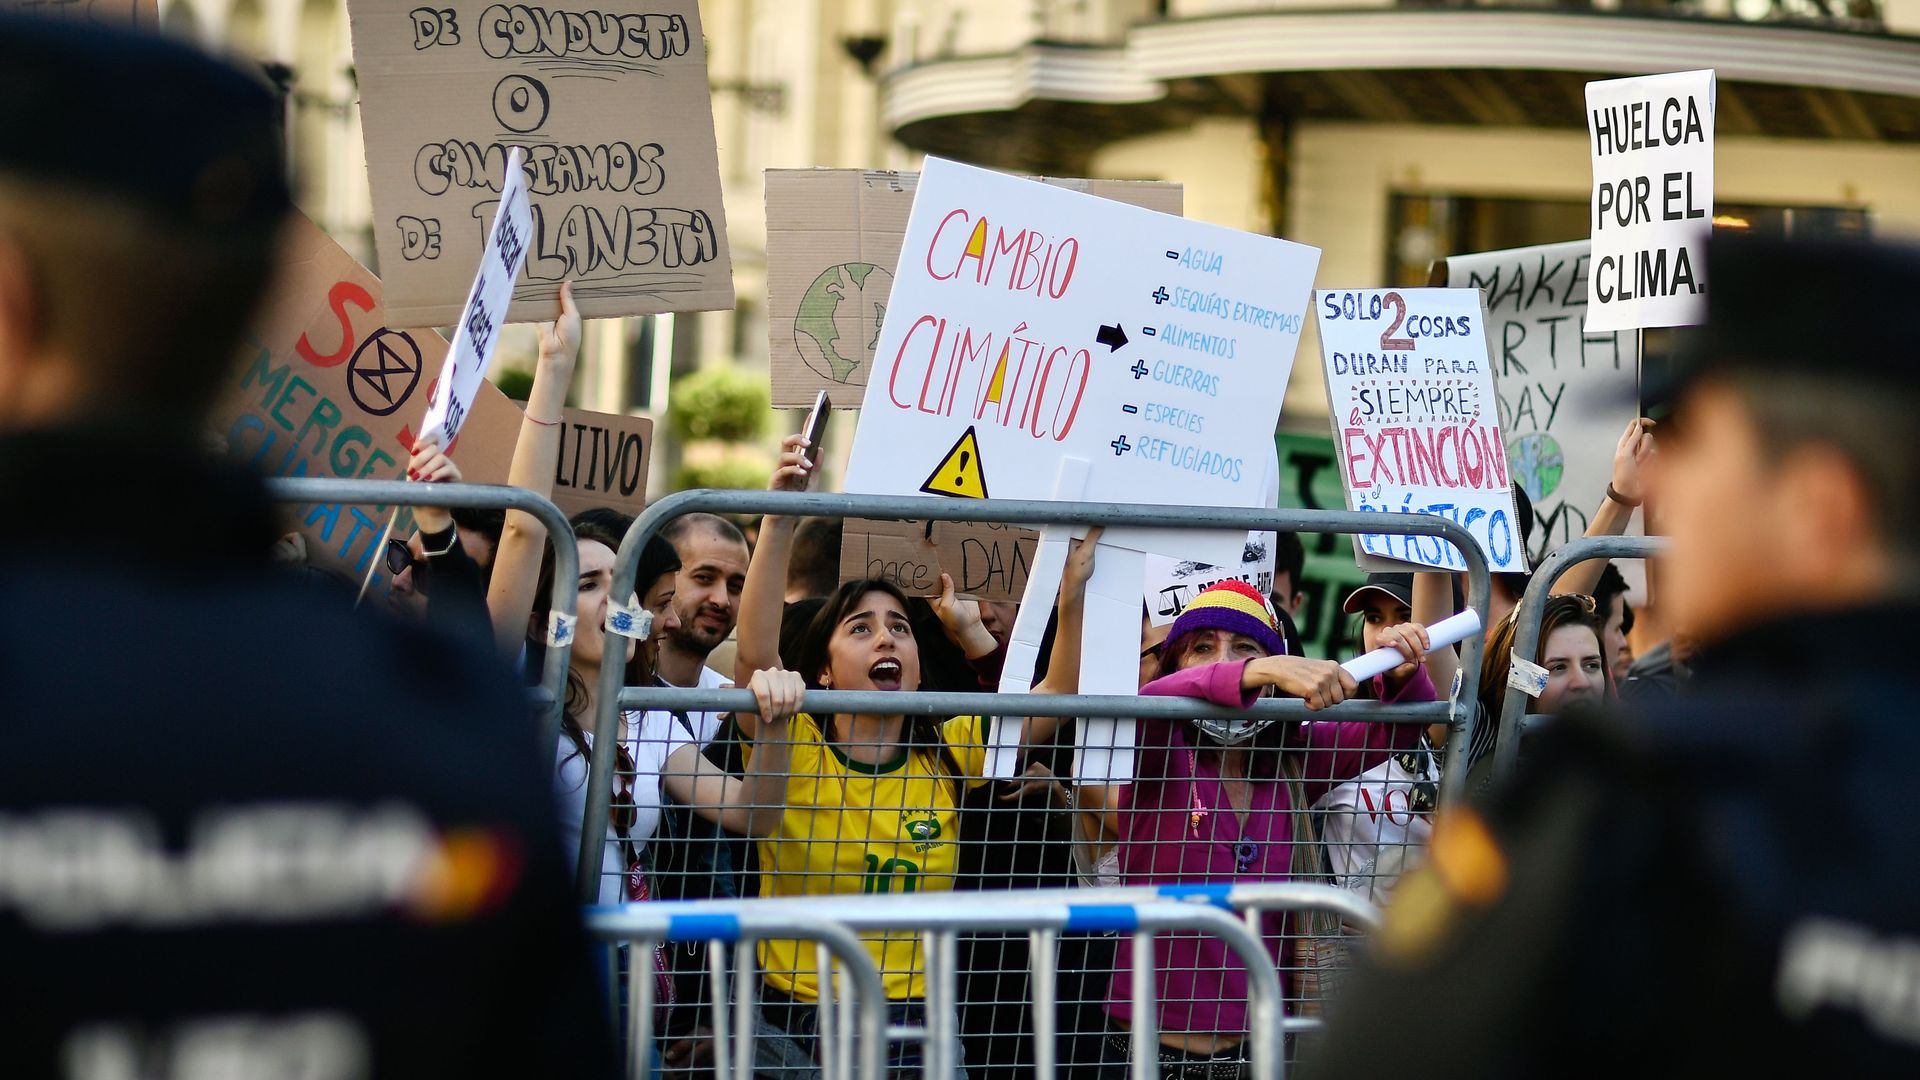 In this image, a child waves a sign from behind a metal gate at a protest in Spain. 